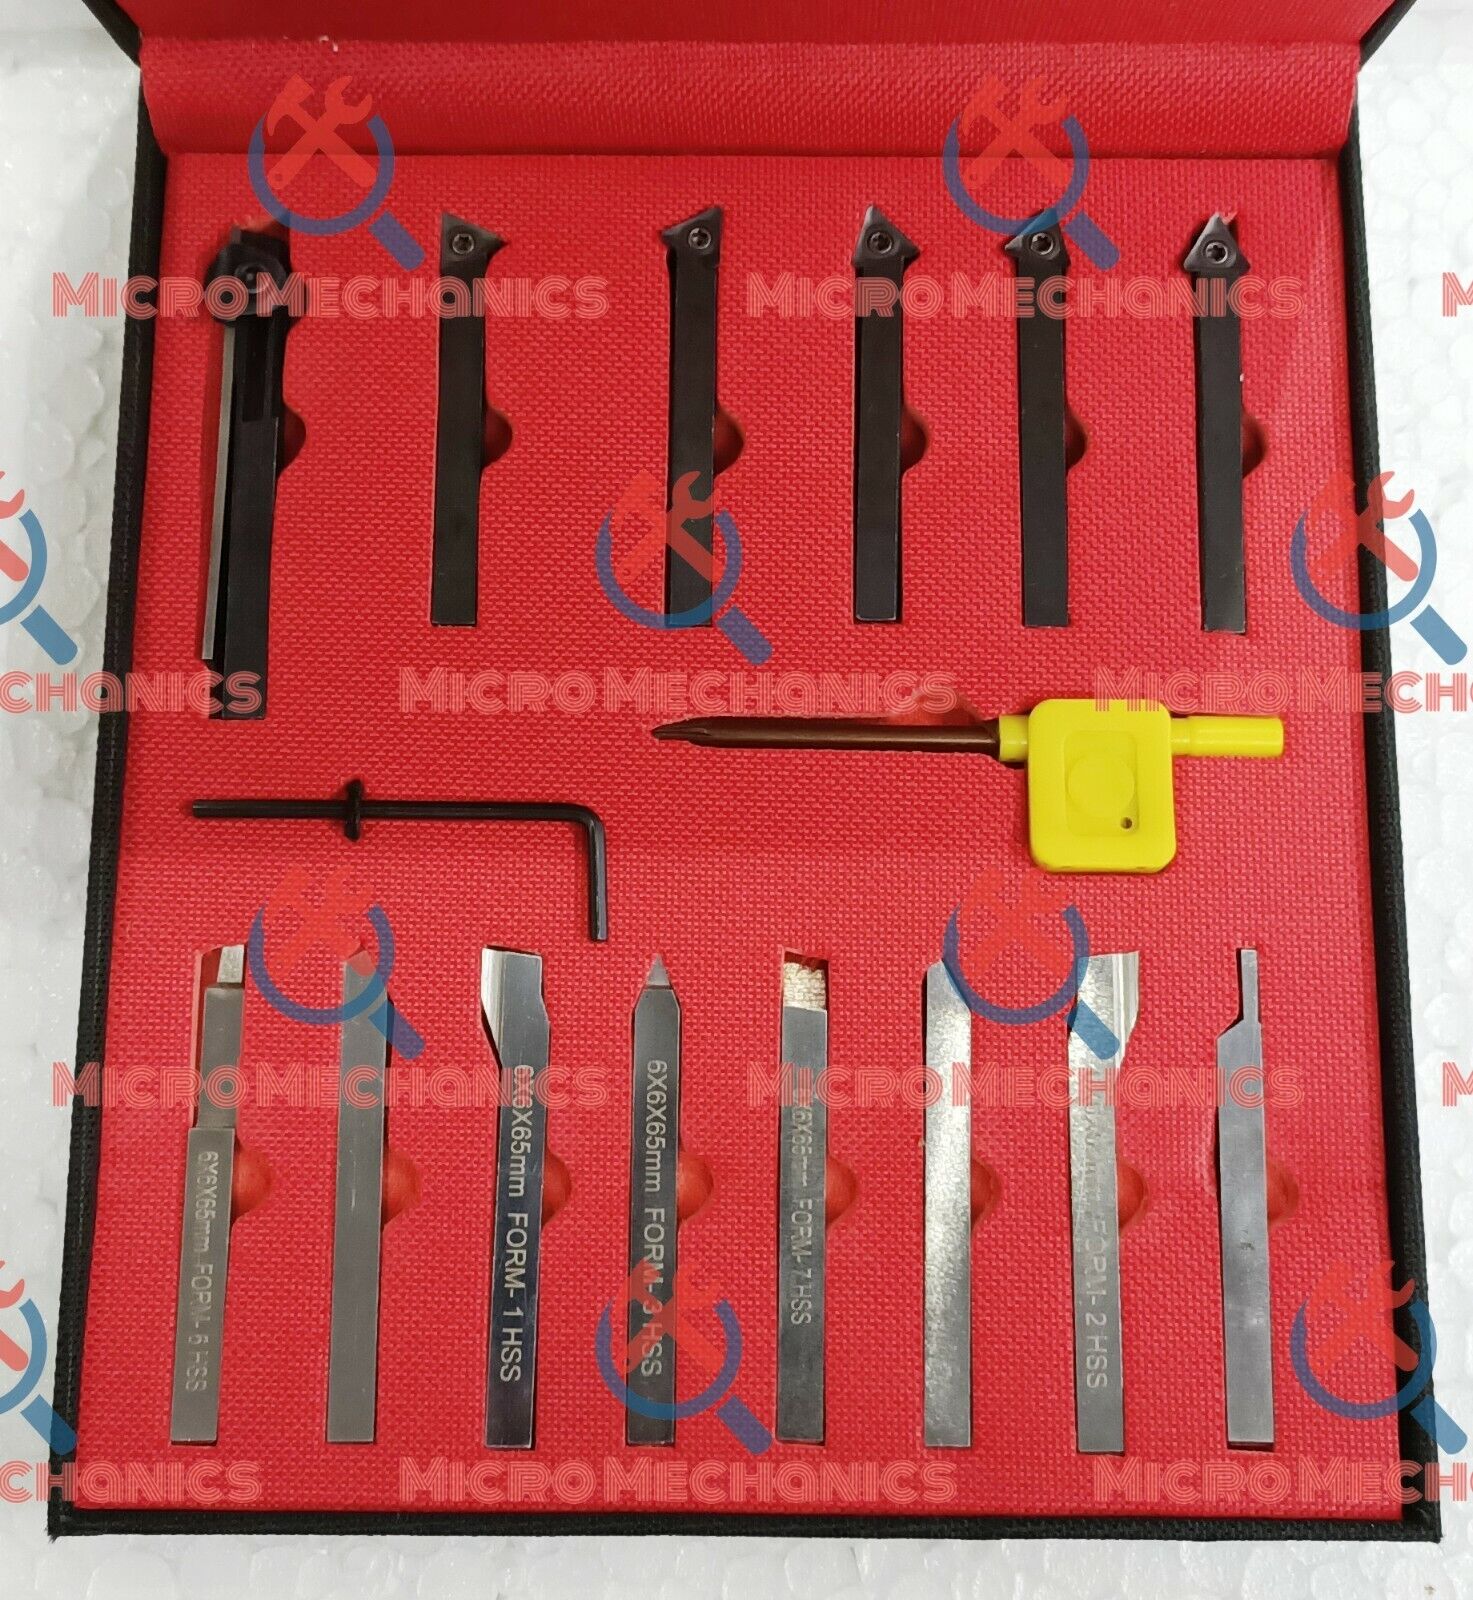 6MM HSS Lathe Form Tools, Mini Parting, Indexable Tools Combo EMCO UNIMAT MYFORD